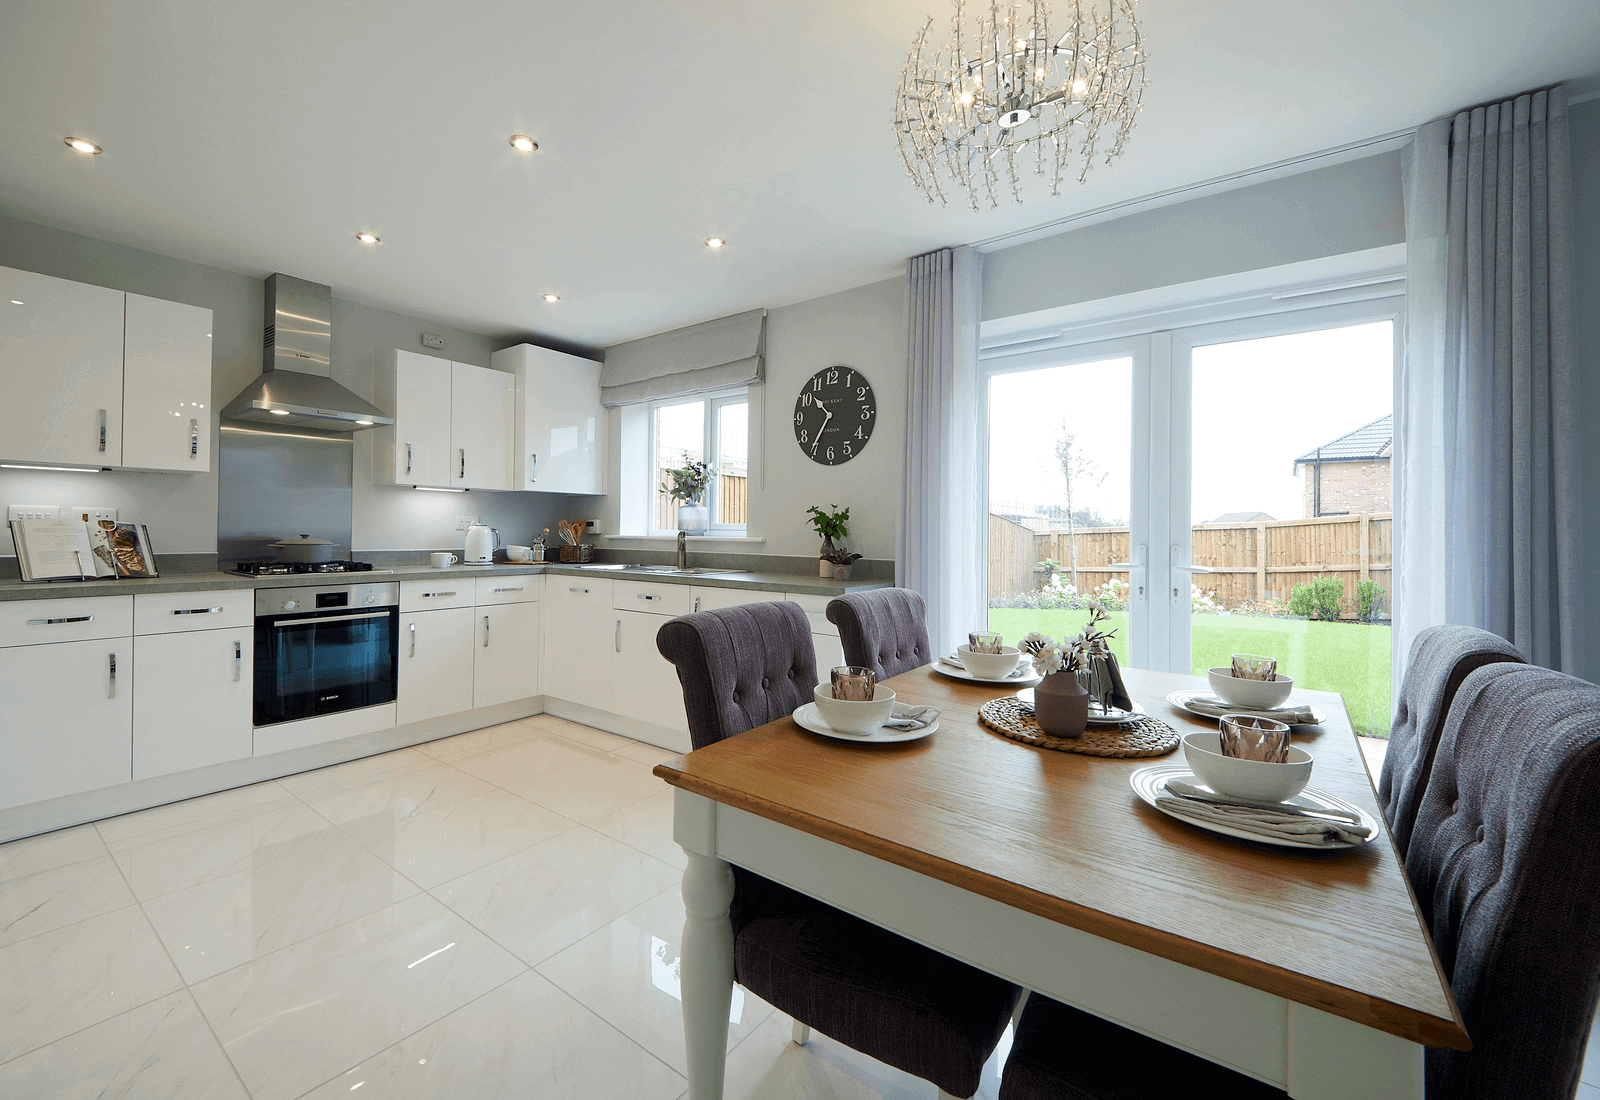 Kitchen-Diner in a Baycliffe Show Home